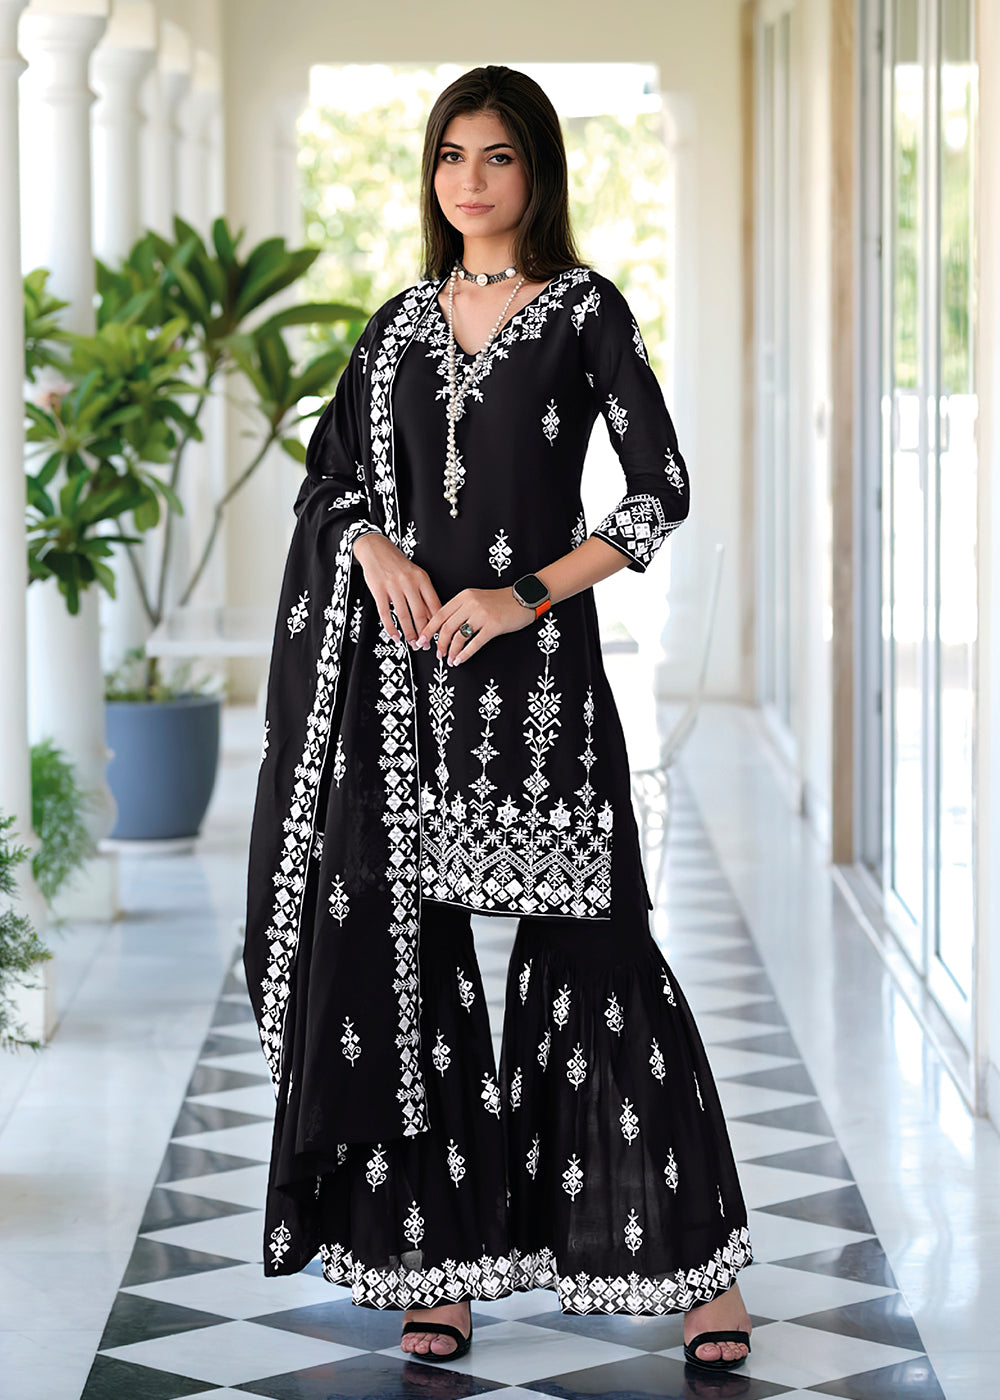 Shop Now Appealing Black Mal Mal Embroidered Festive Sharara Suit Online at Empress Clothing in USA, UK, Canada, Italy & Worldwide. 